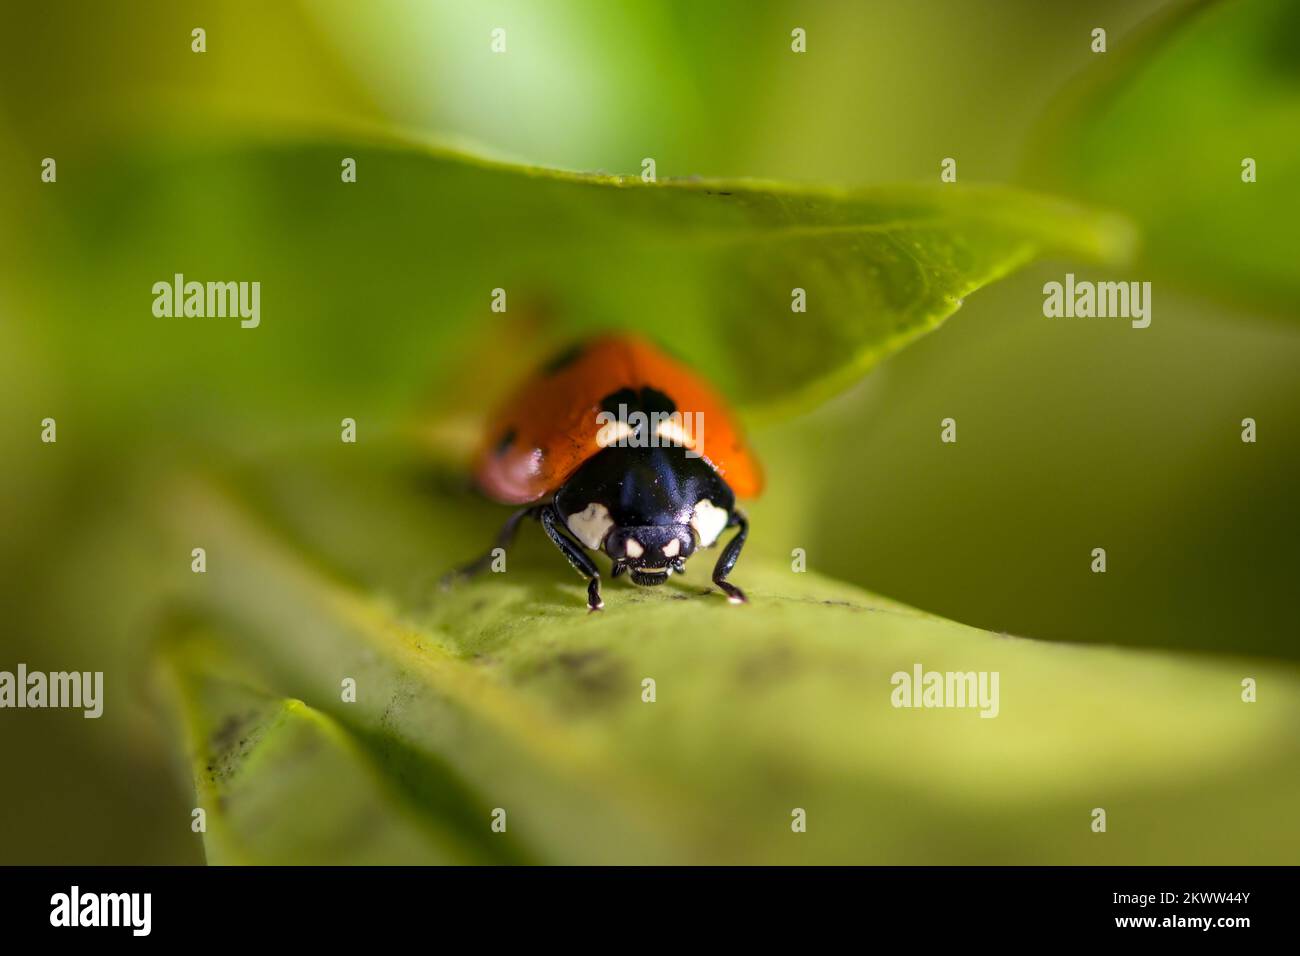 macro image of a ladybird, Coccinellidae, beetle walking up the stem of an orange plant, red, black and white heart shaped eyes Stock Photo